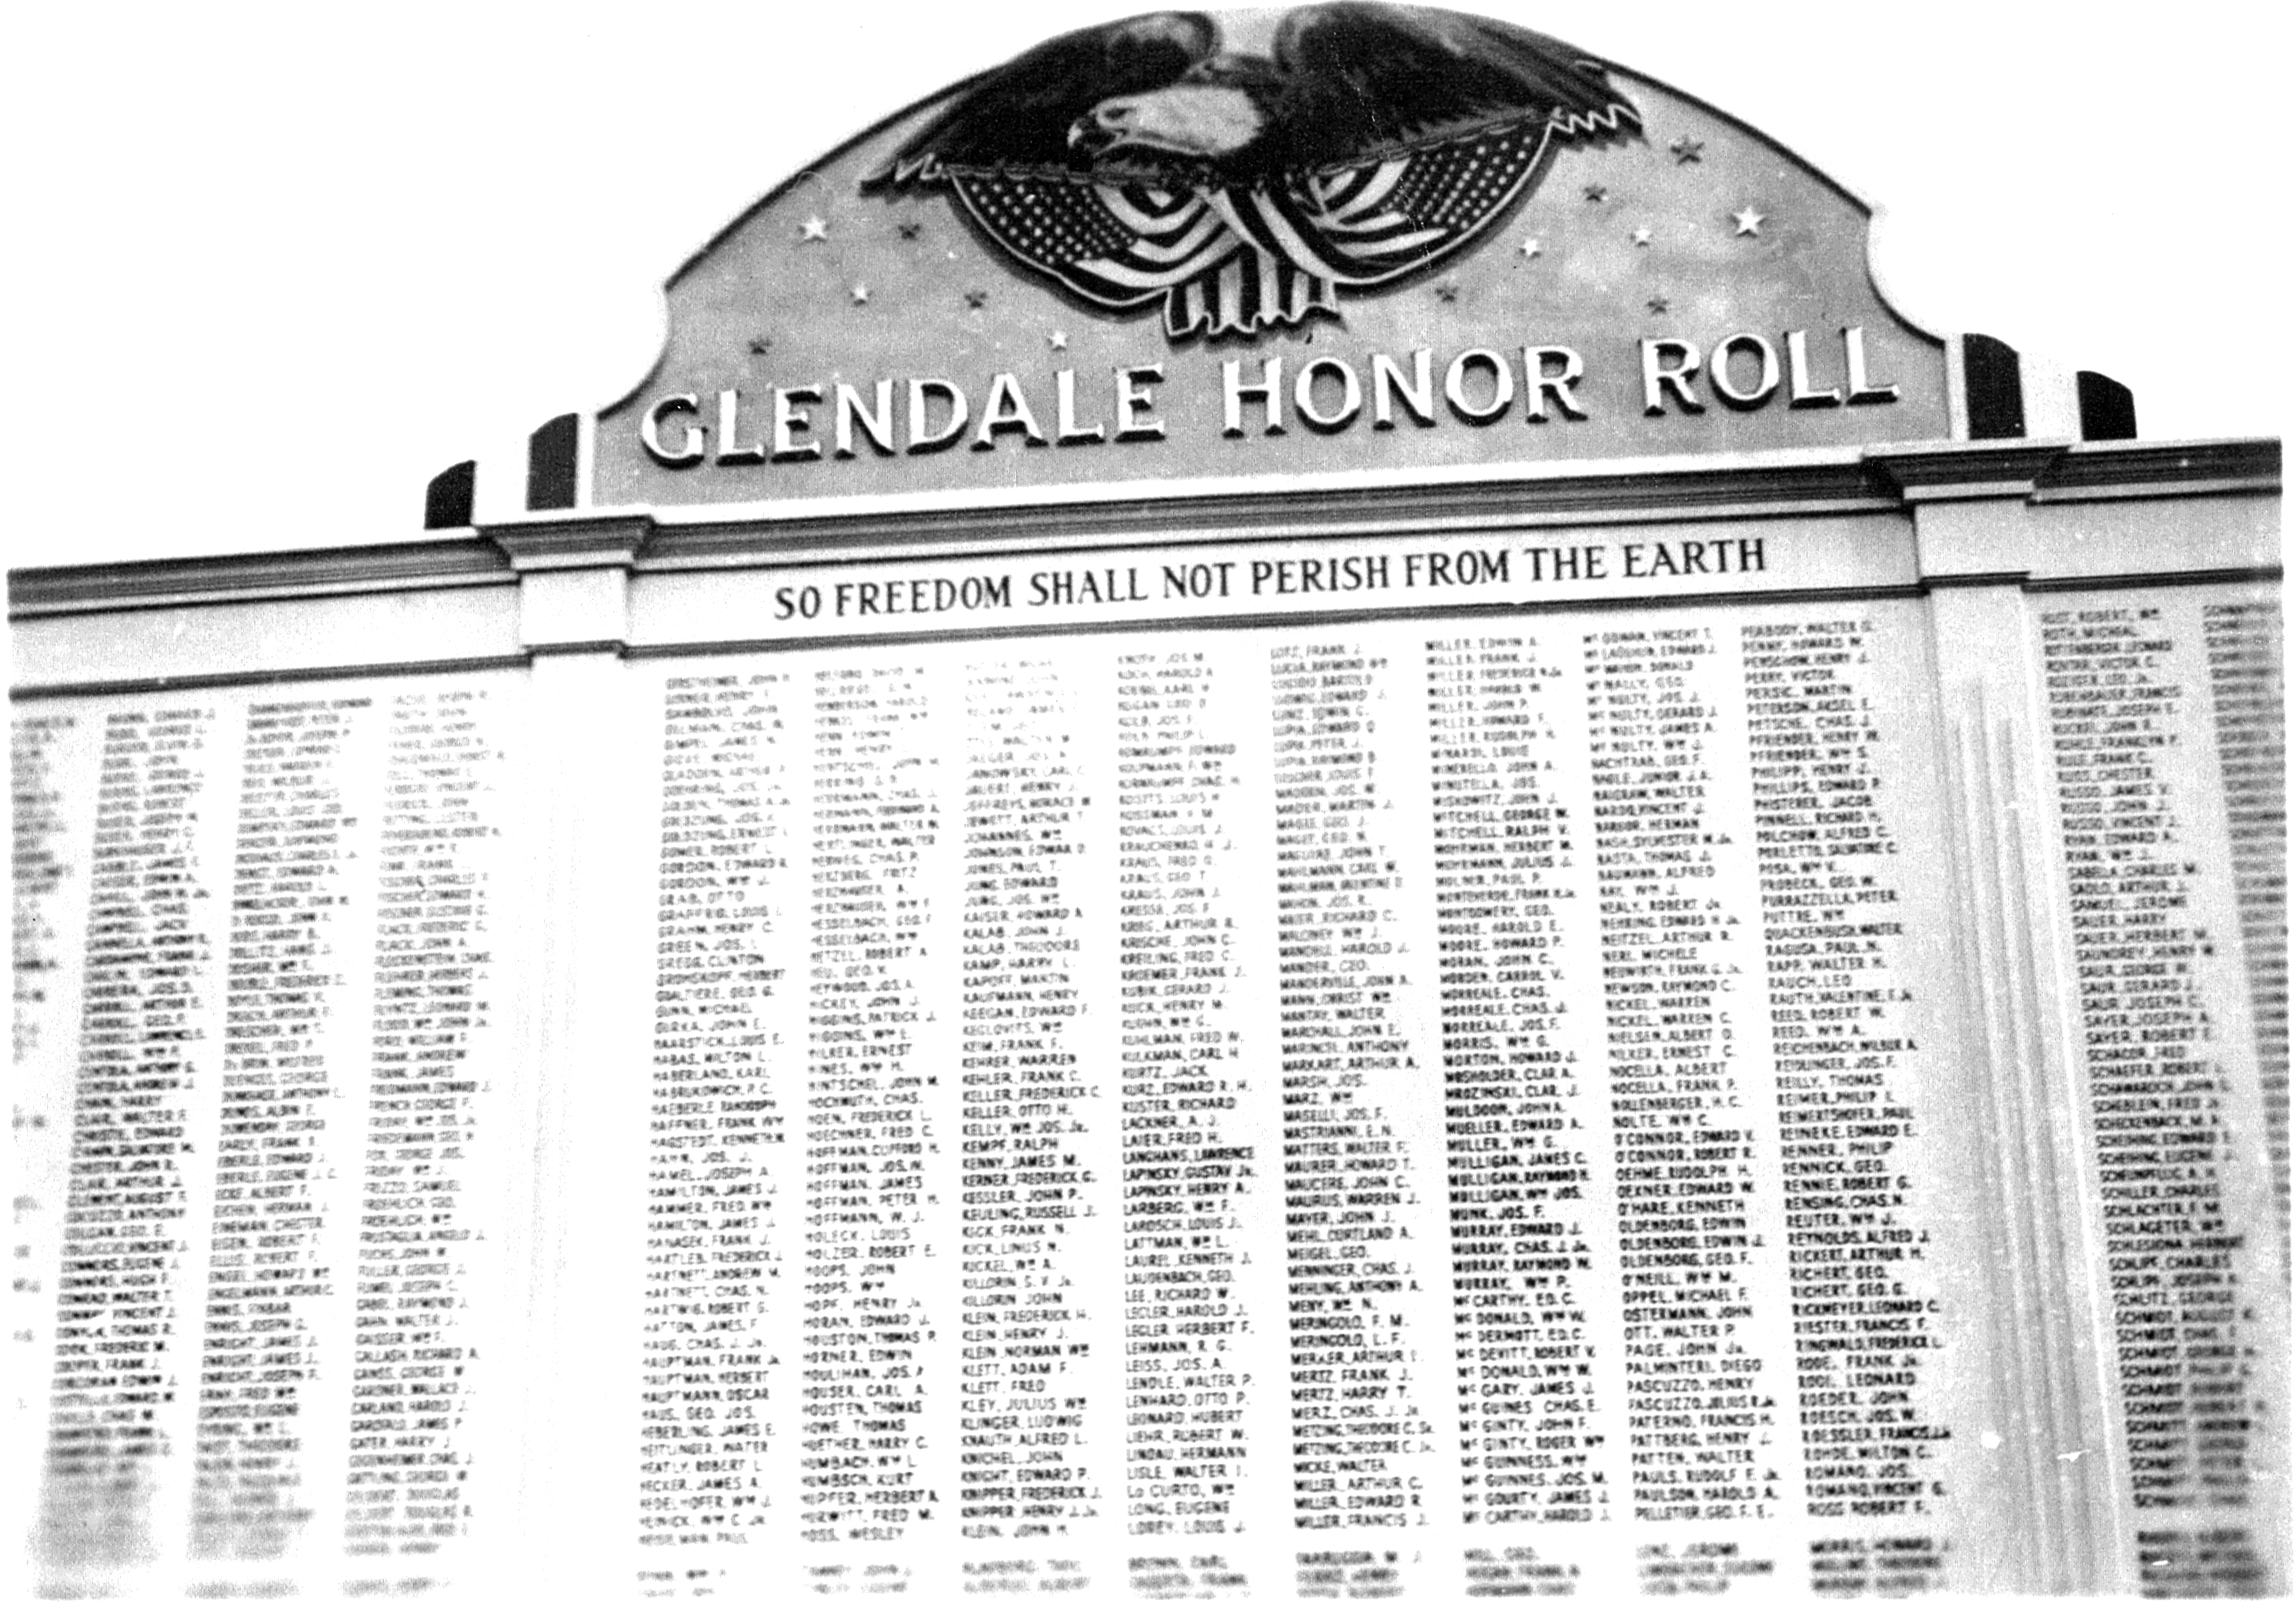 The Glendale honor roll, on the site of the former St. Pancras School on Myrtle Avenue and 68th Street, was erected during World War II to honor local men who went off to fight overseas.